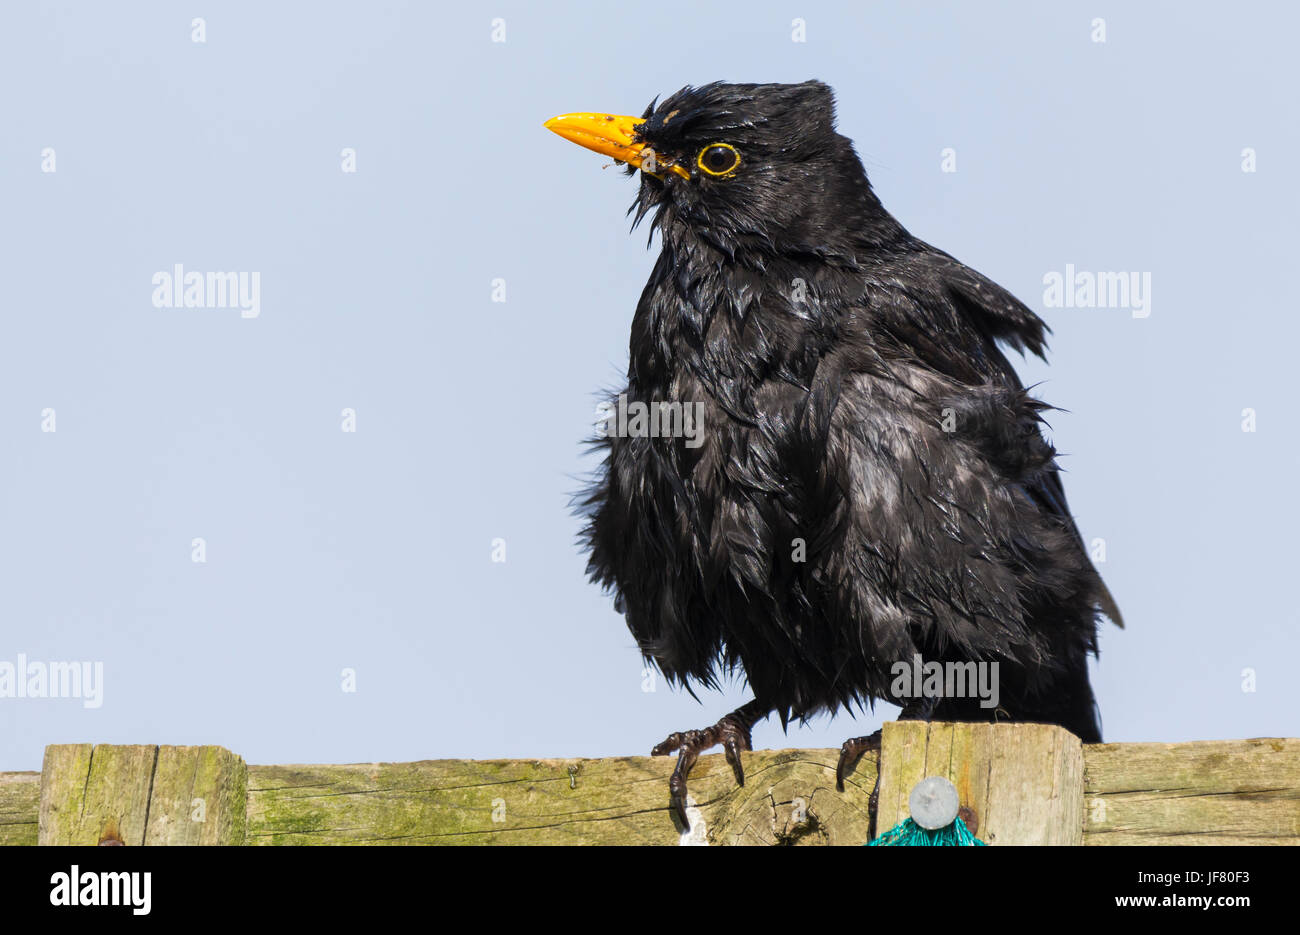 Turdus merula perching. Blackbird perched on a wooden fence in the UK. Stock Photo